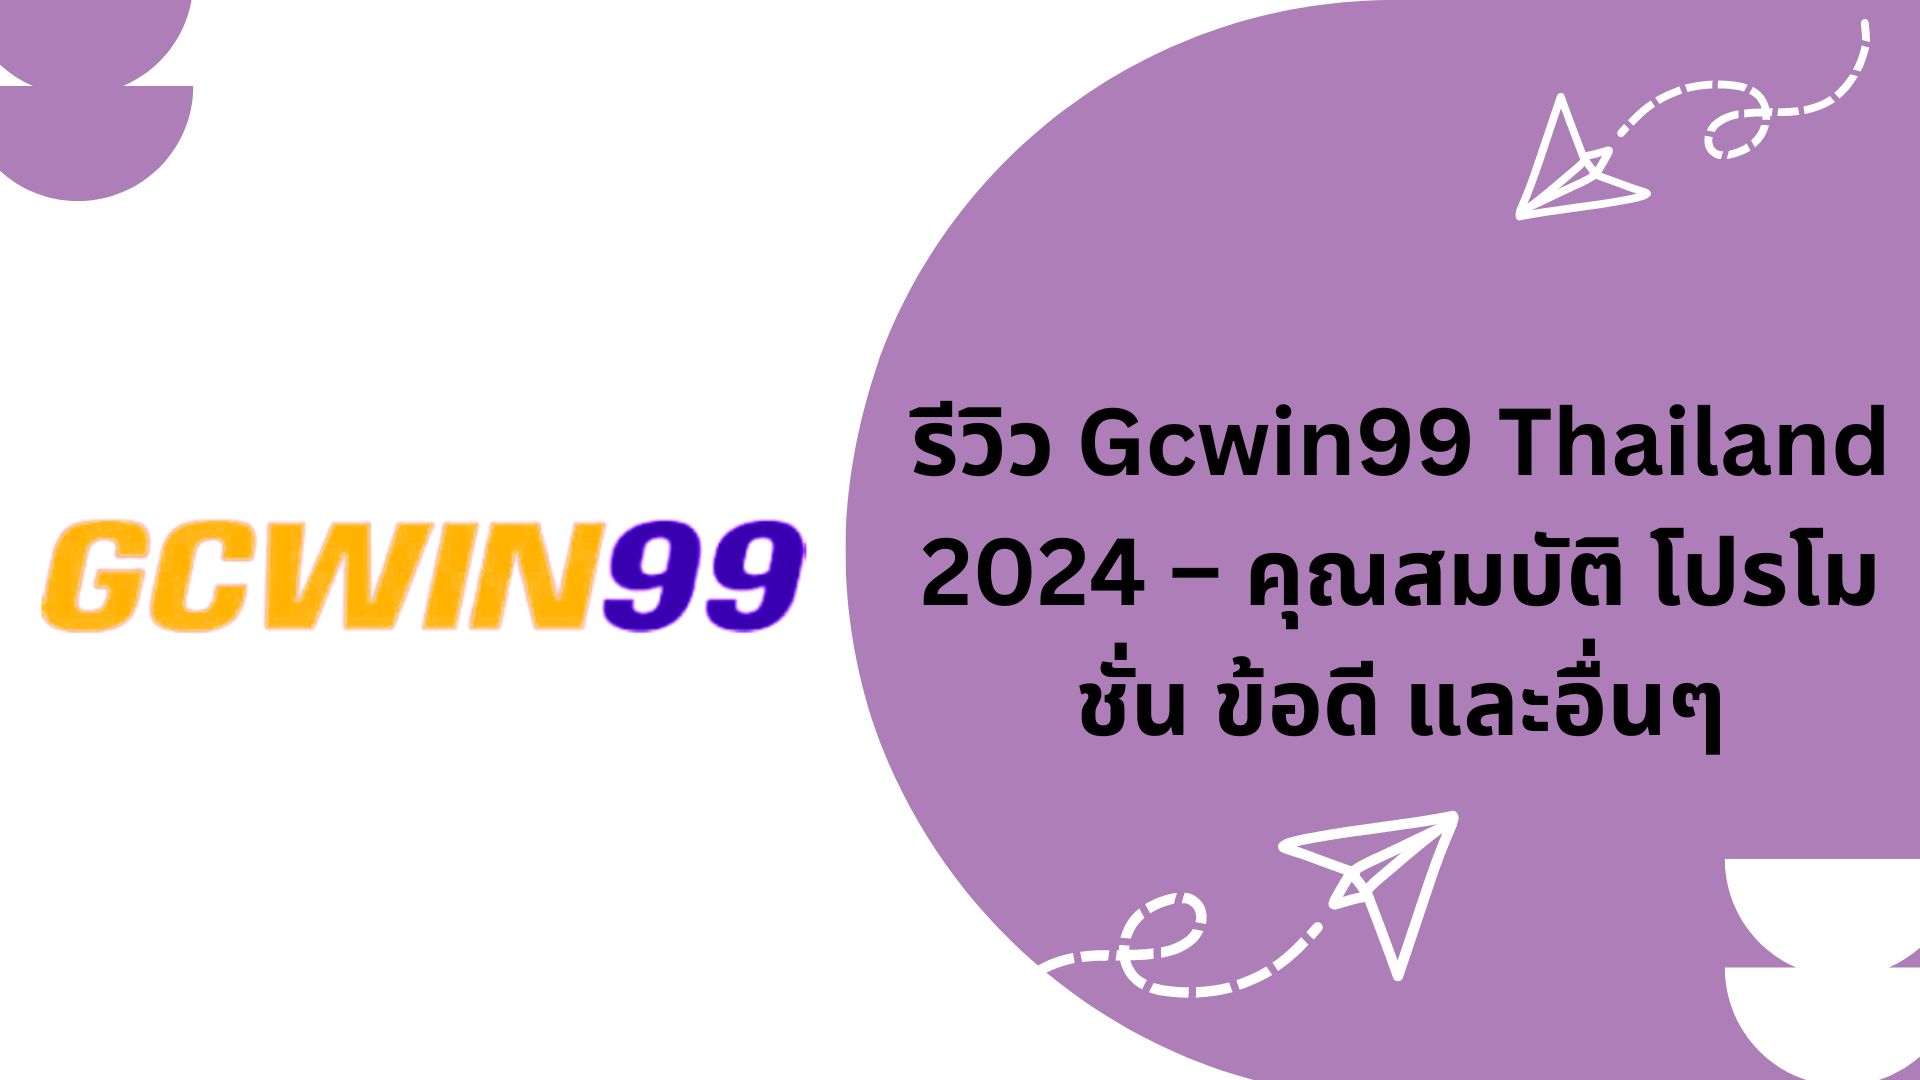 Gcwin99 Thailand Review